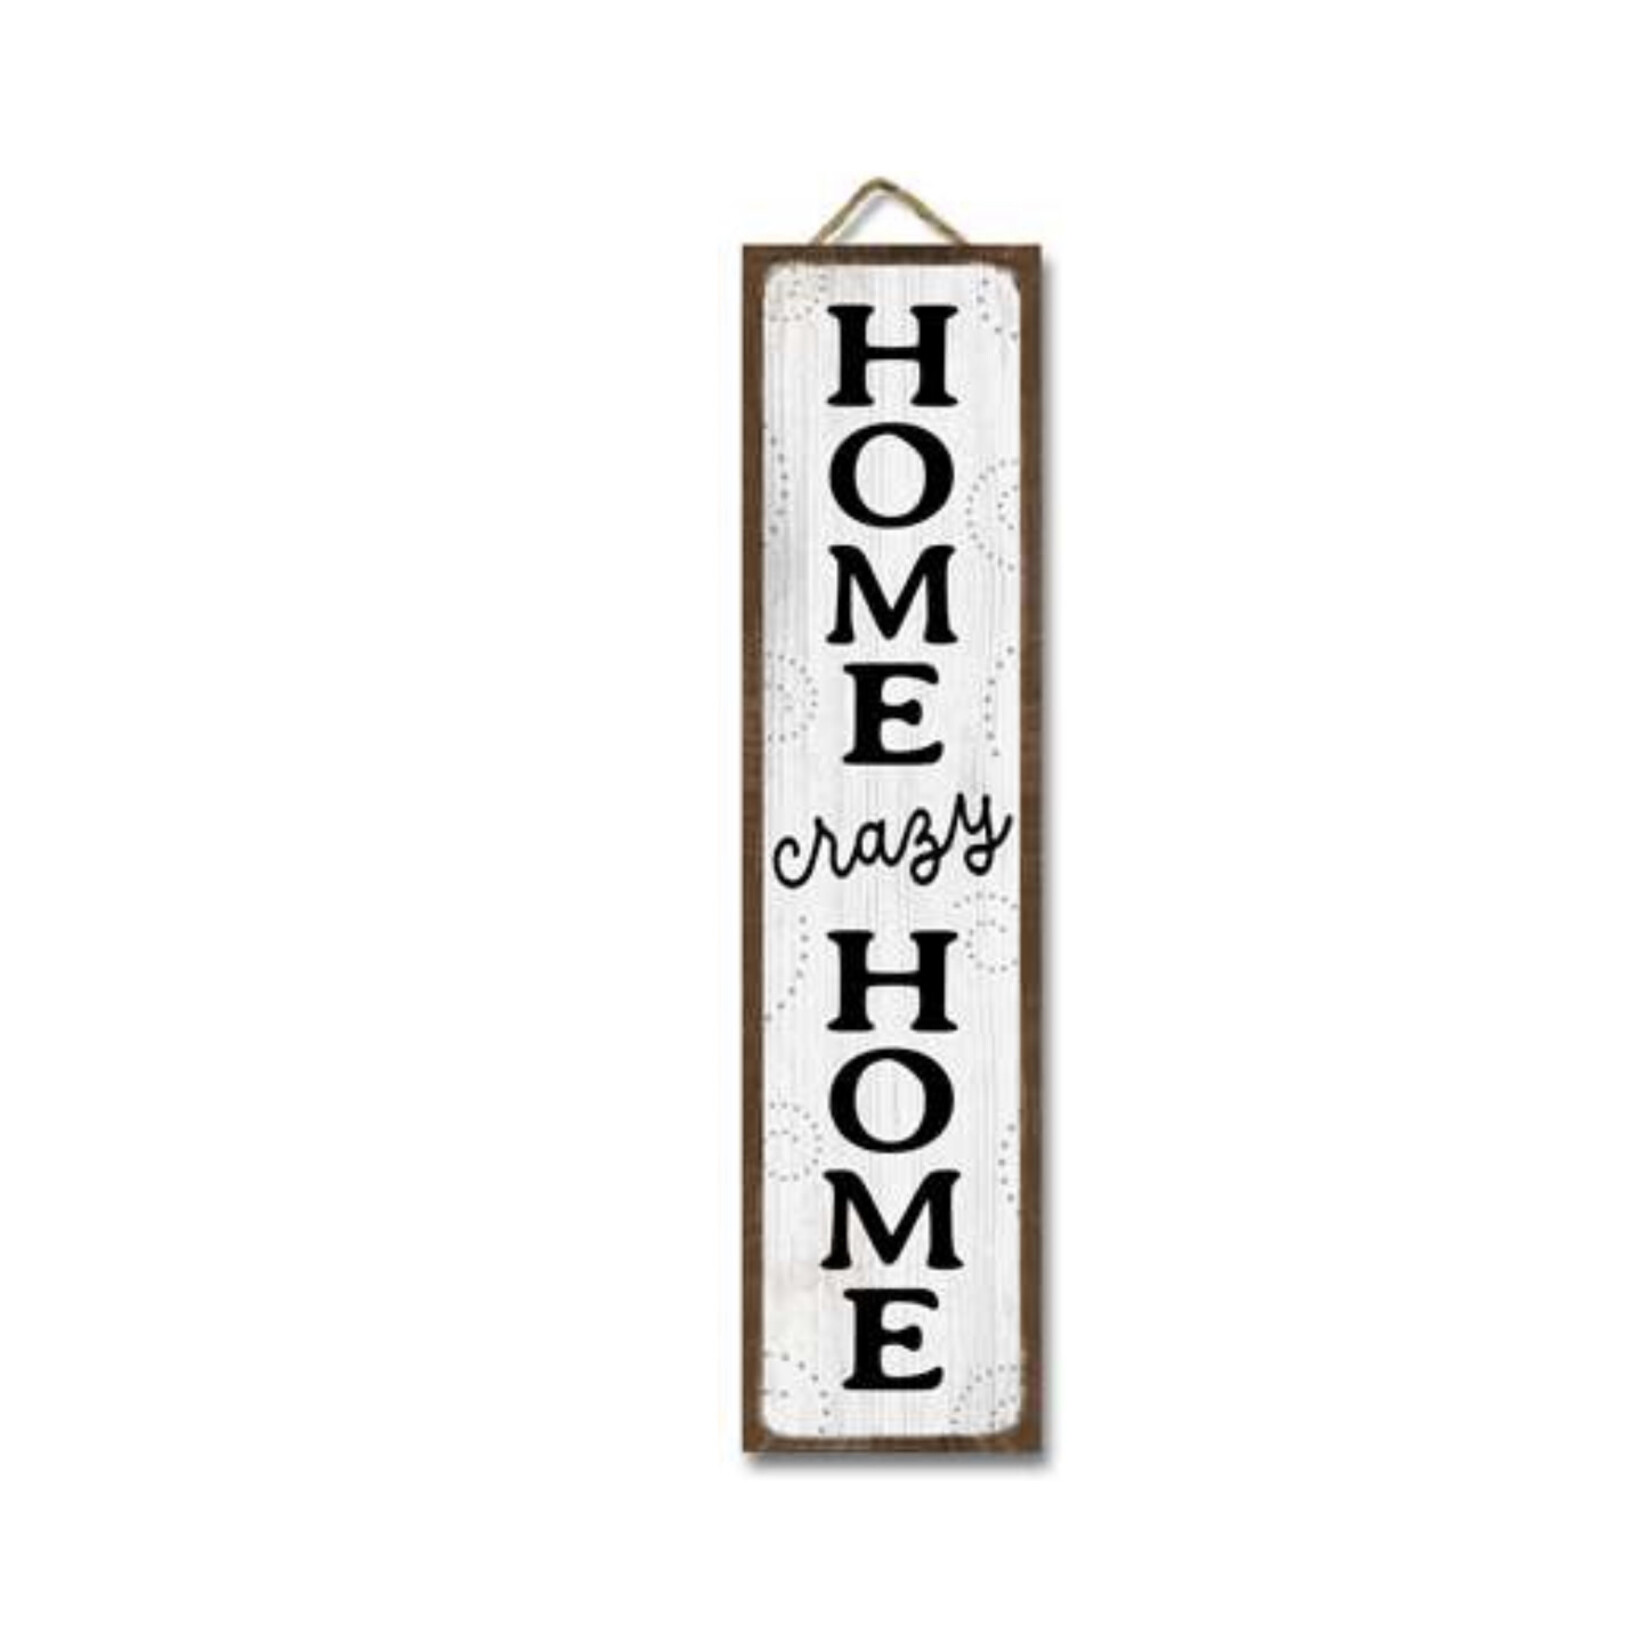 My Word! Home Crazy Home Stand Out Tall Sign